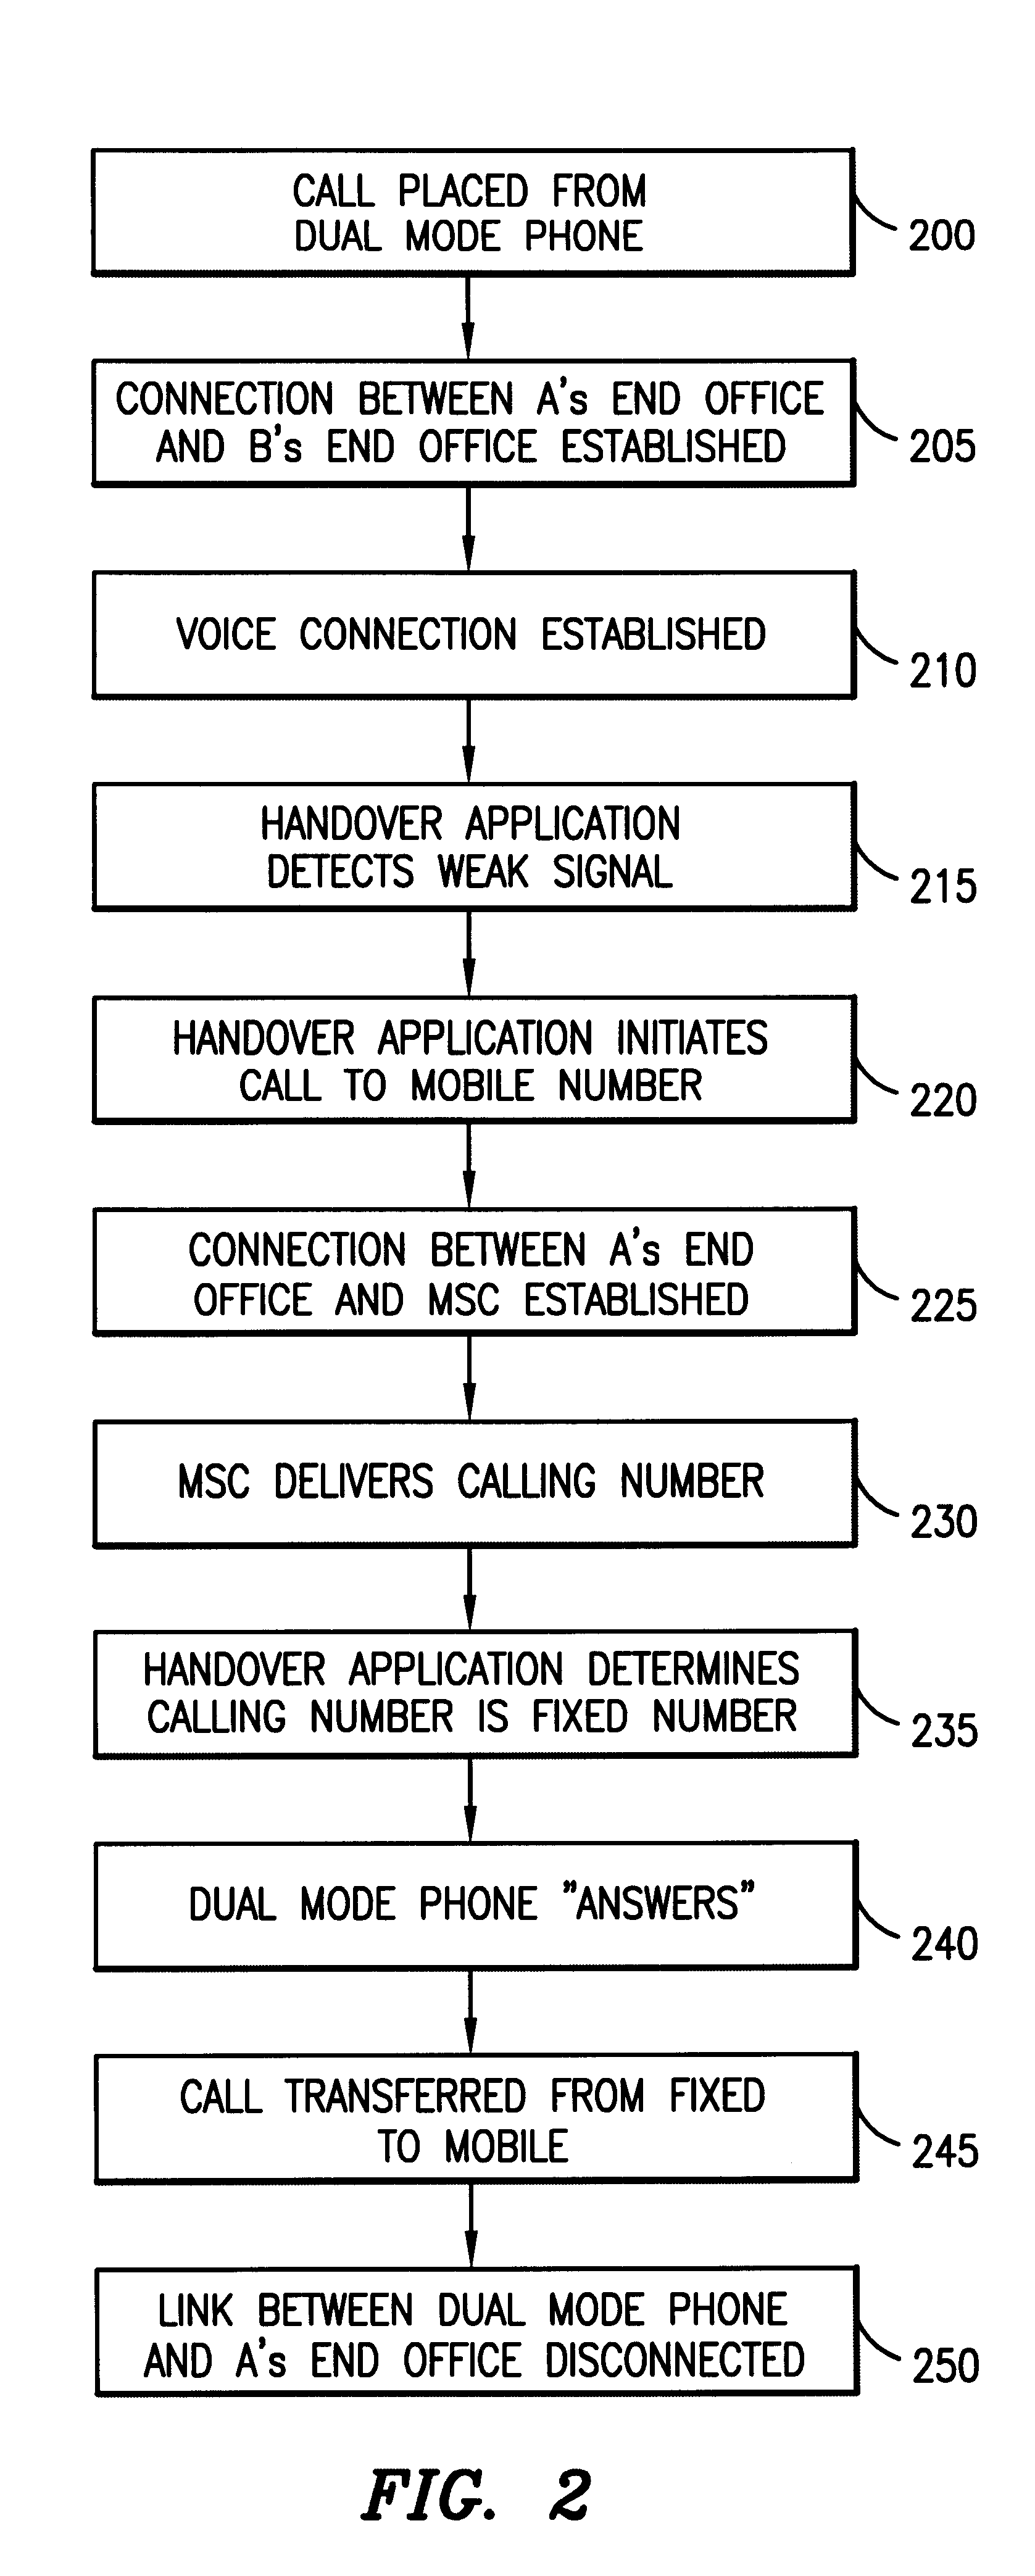 Handover between fixed and mobile networks for dual mode phones